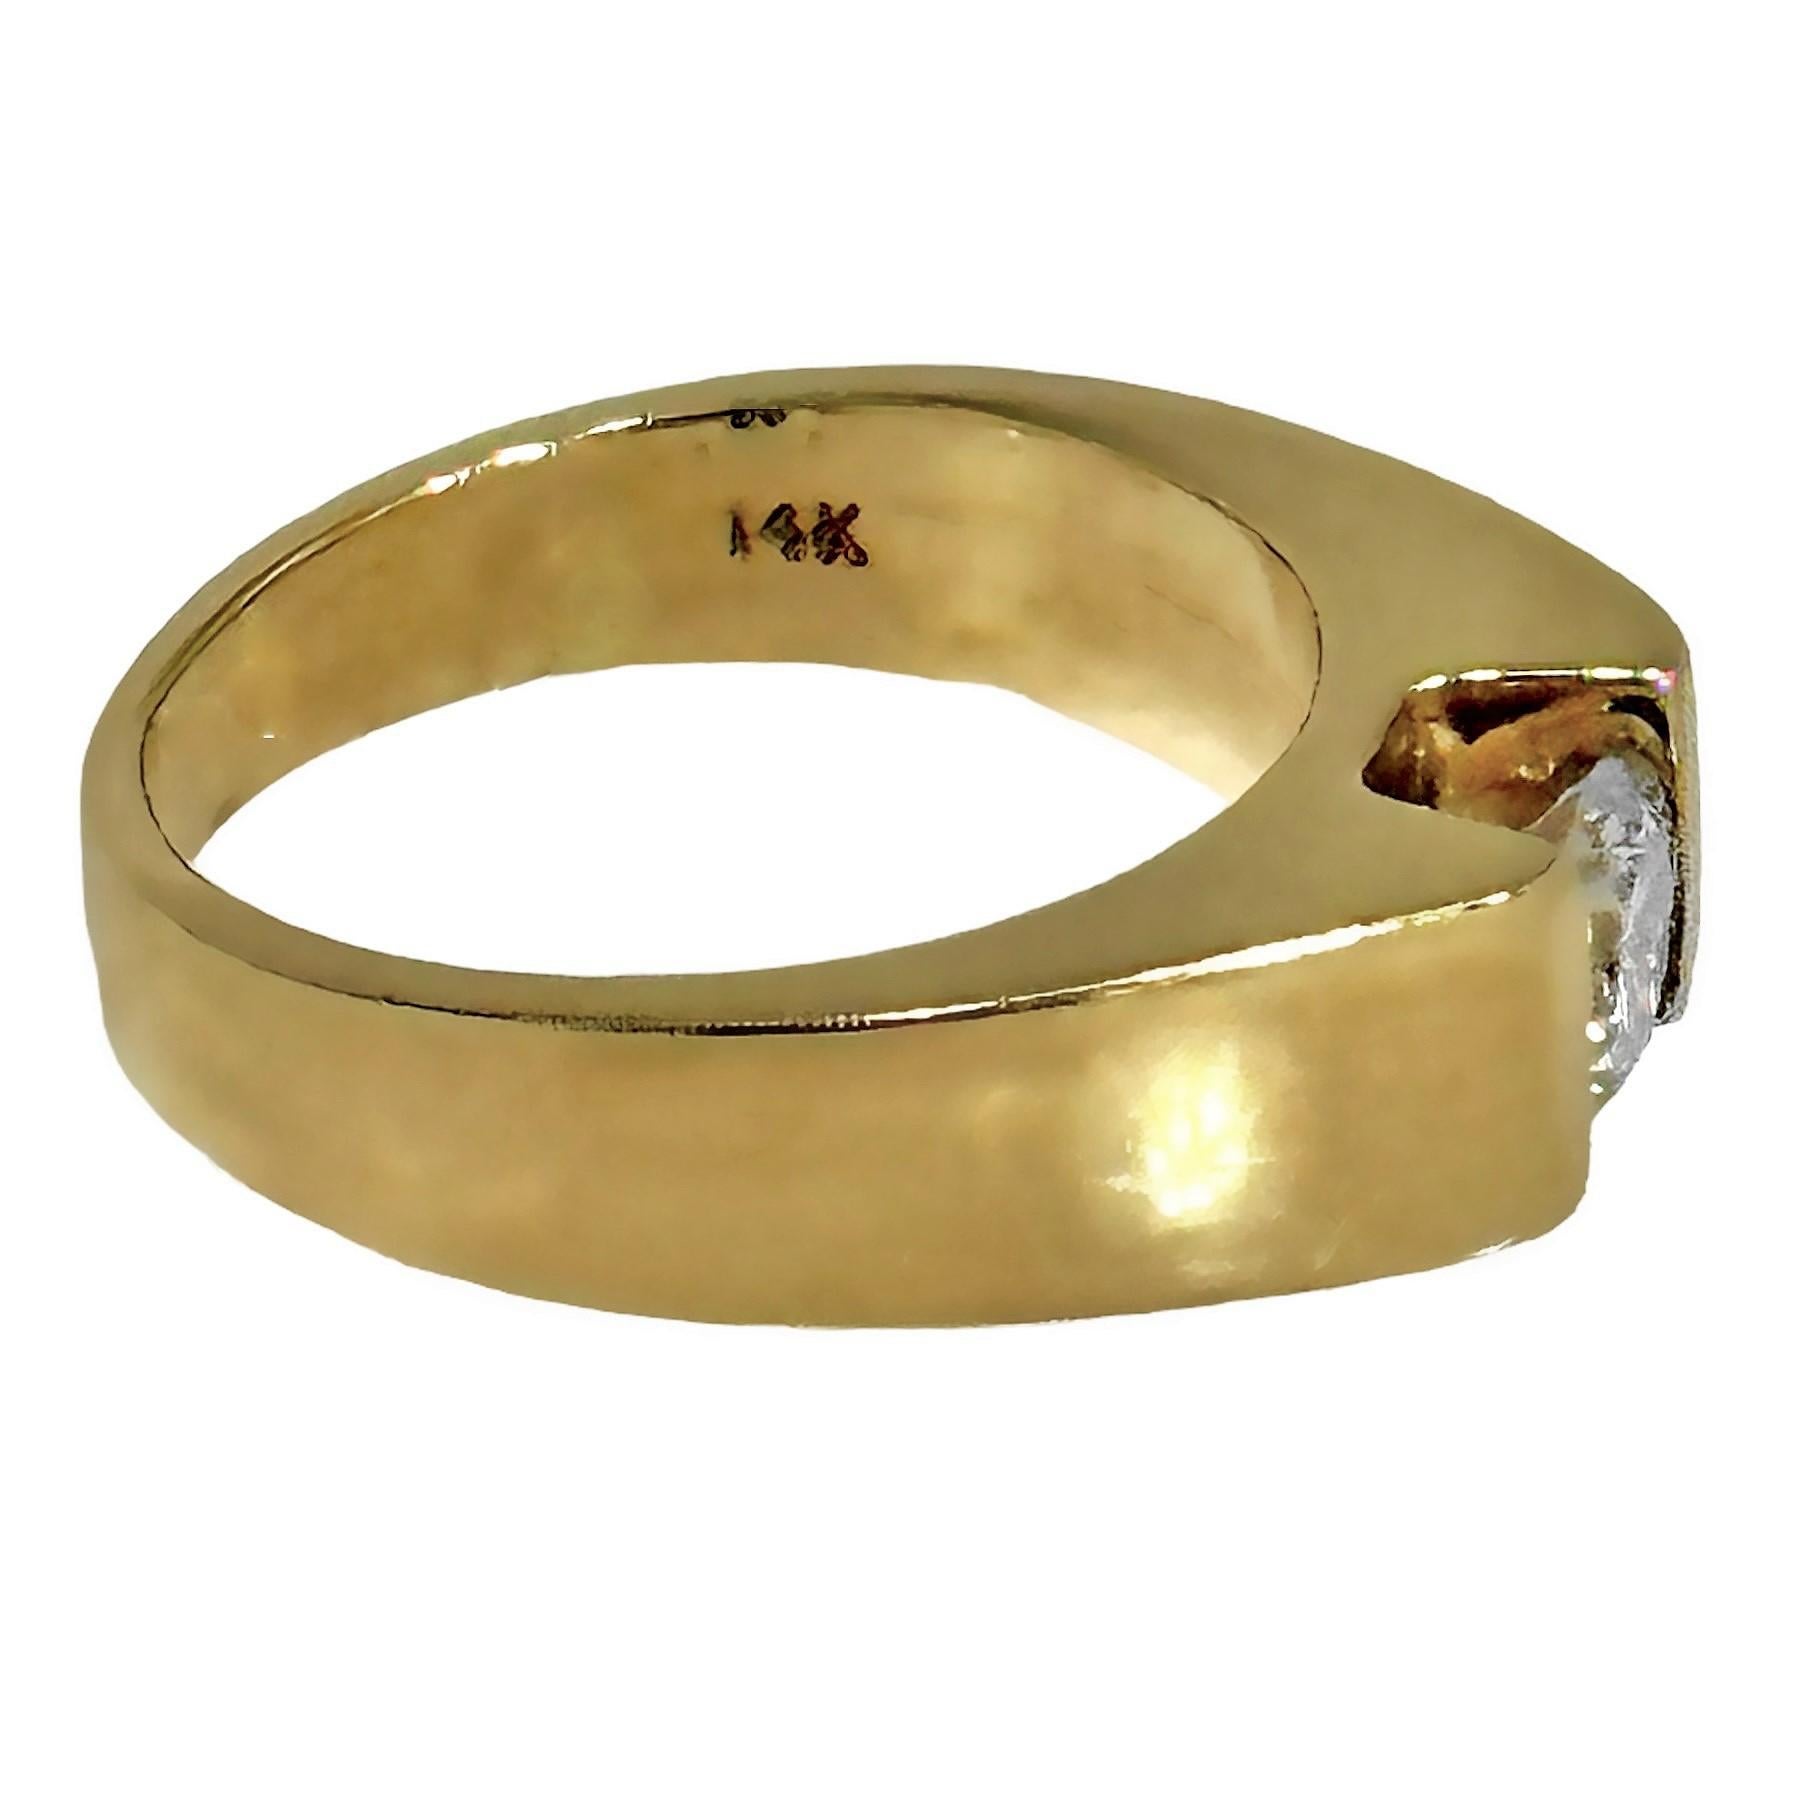 A sleek modern-looking ring in 14K yellow gold with a half carat diamond. The shoulders of the ring rise about 1/5 of an inch above the finger allowing the appropriate height for the diamond to be set. The tension setting method offers maximum light